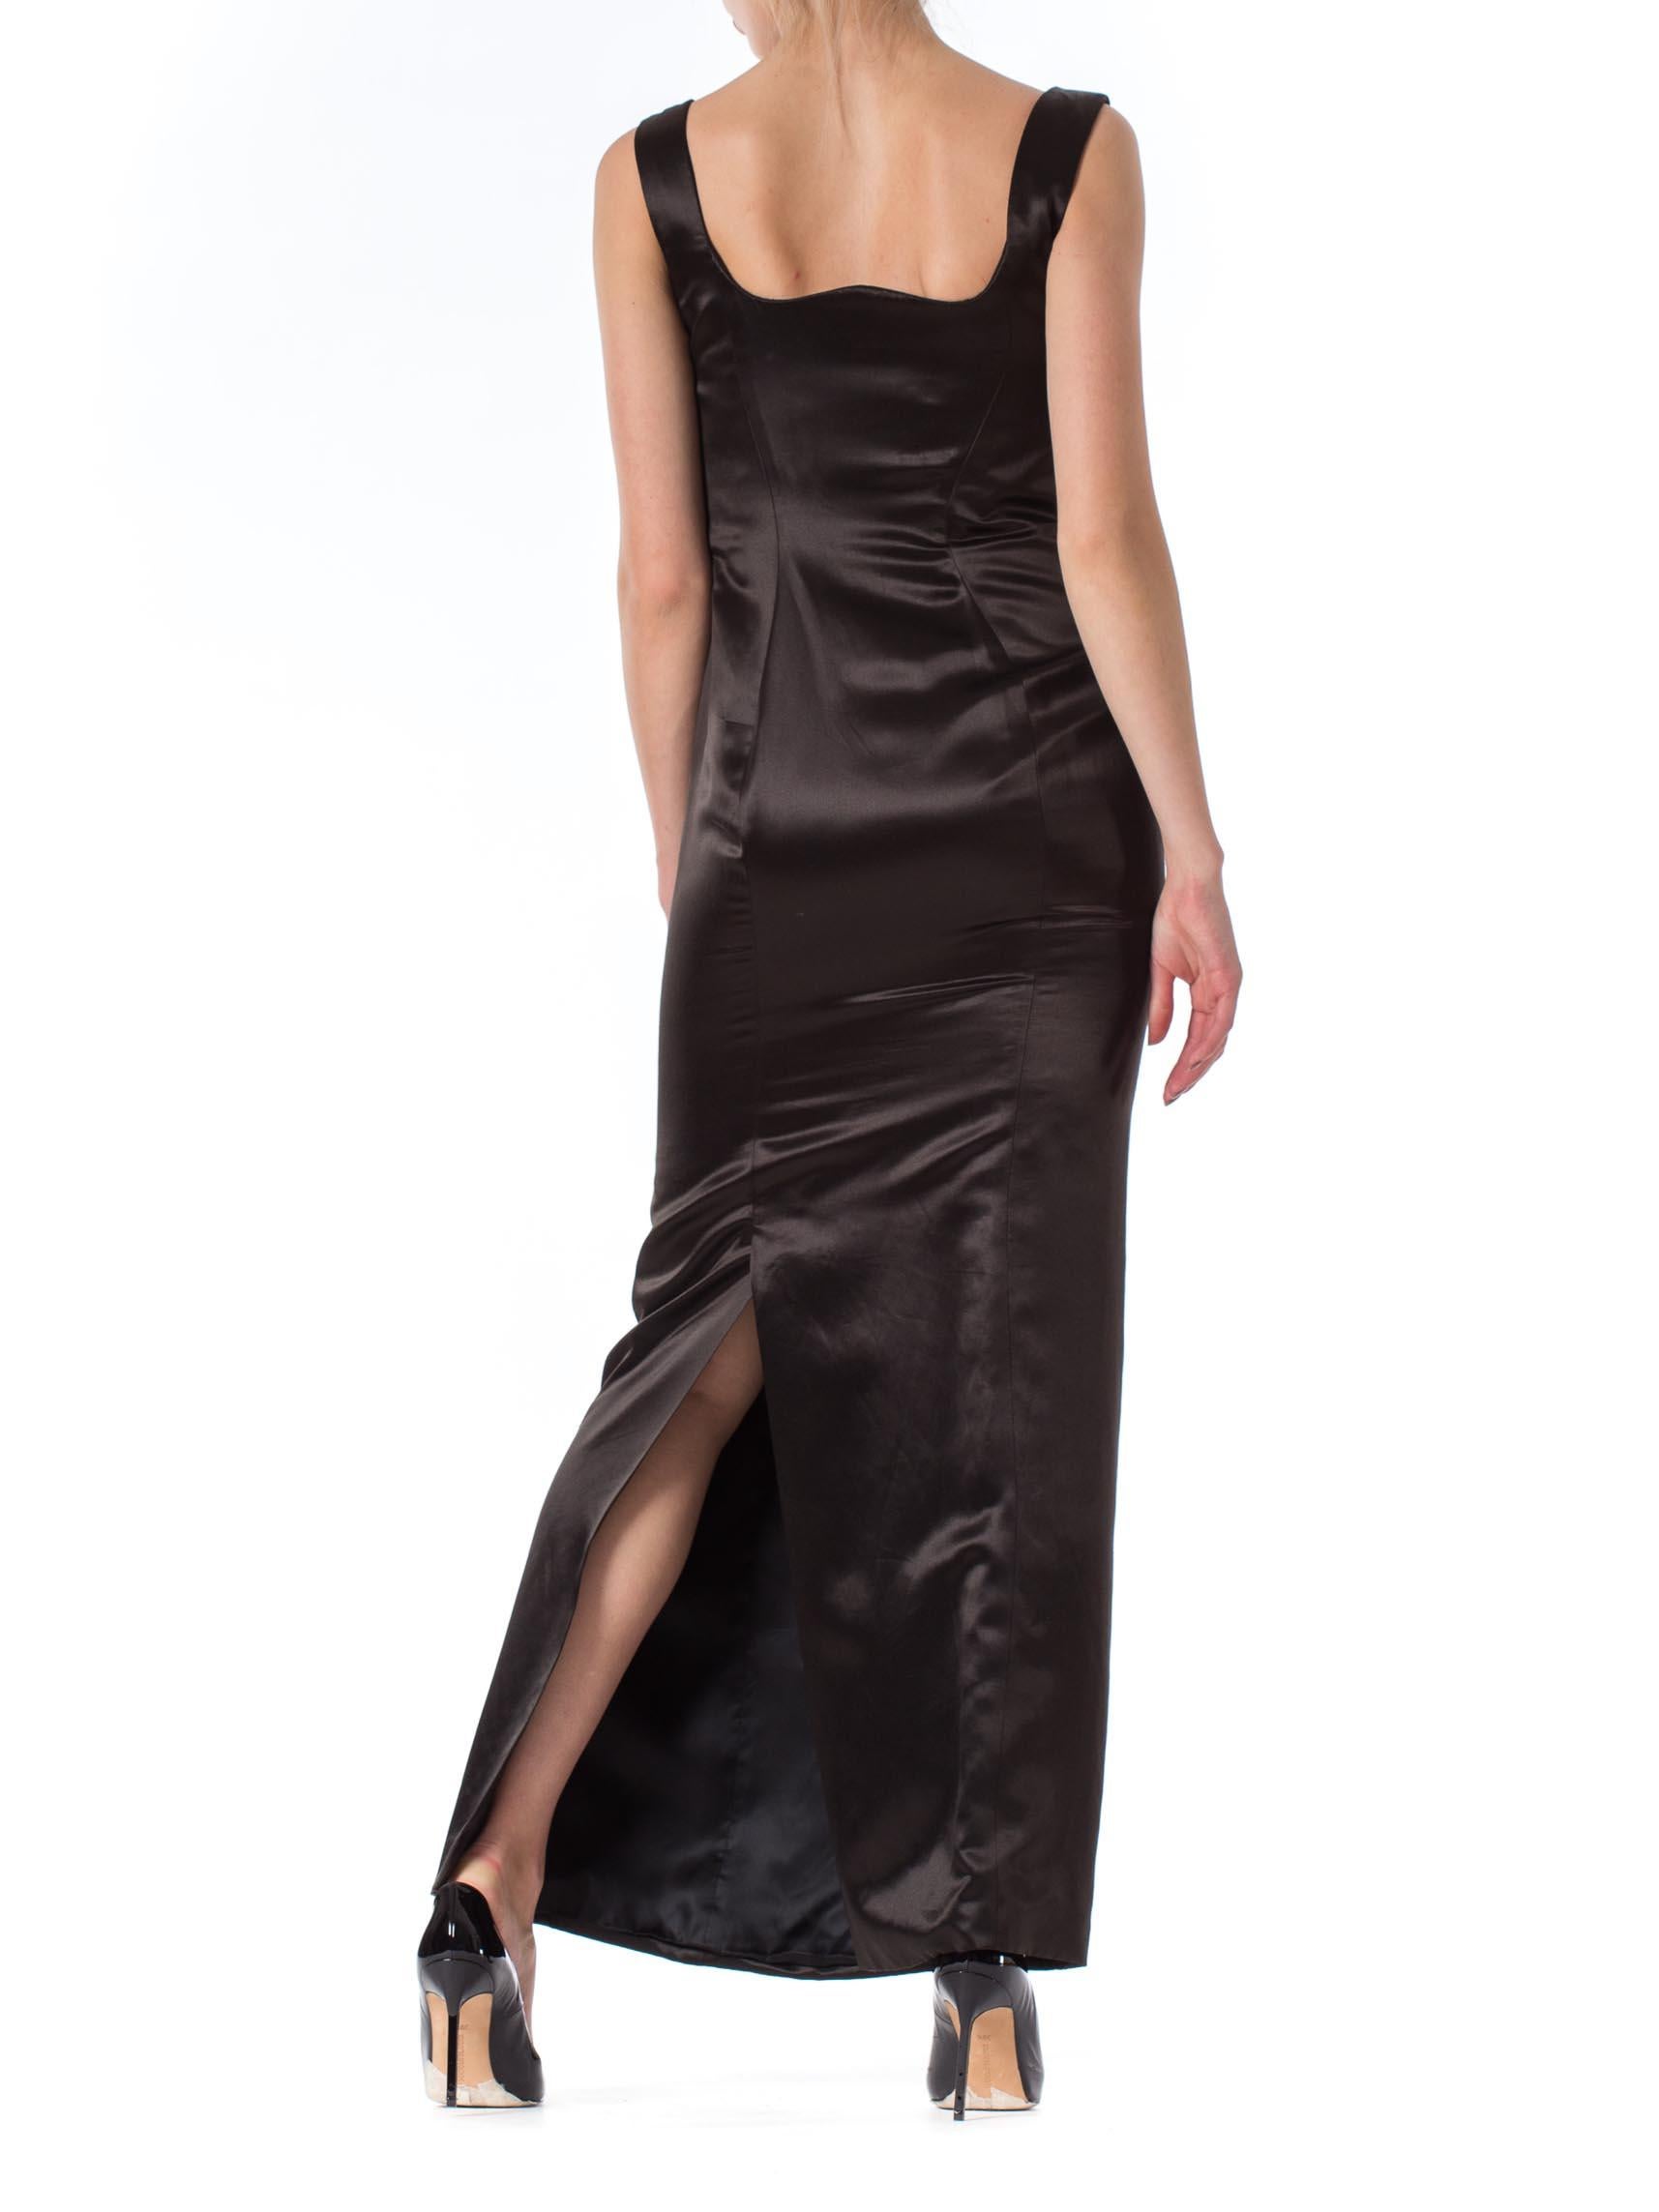 1990s Gianni Versace Couture Satin Gown In Good Condition For Sale In New York, NY